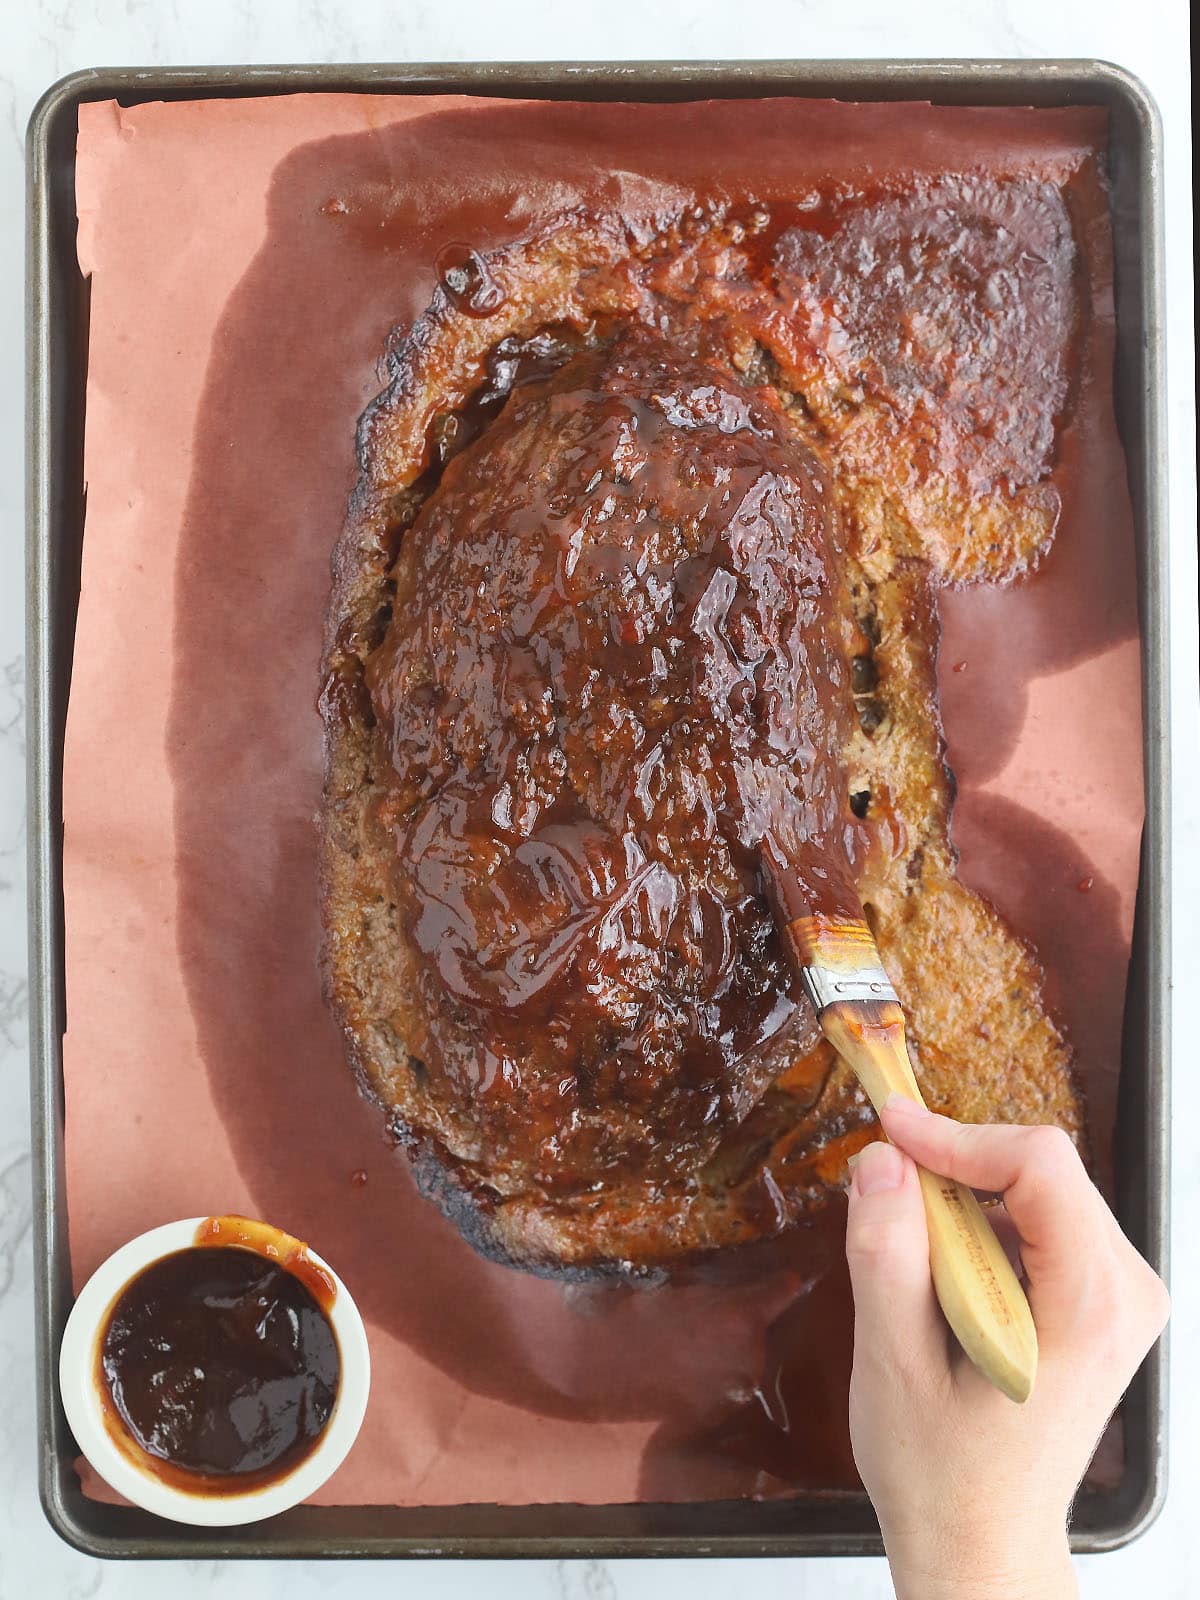 Hand brushing the top of a meatloaf with barbecue sauce.